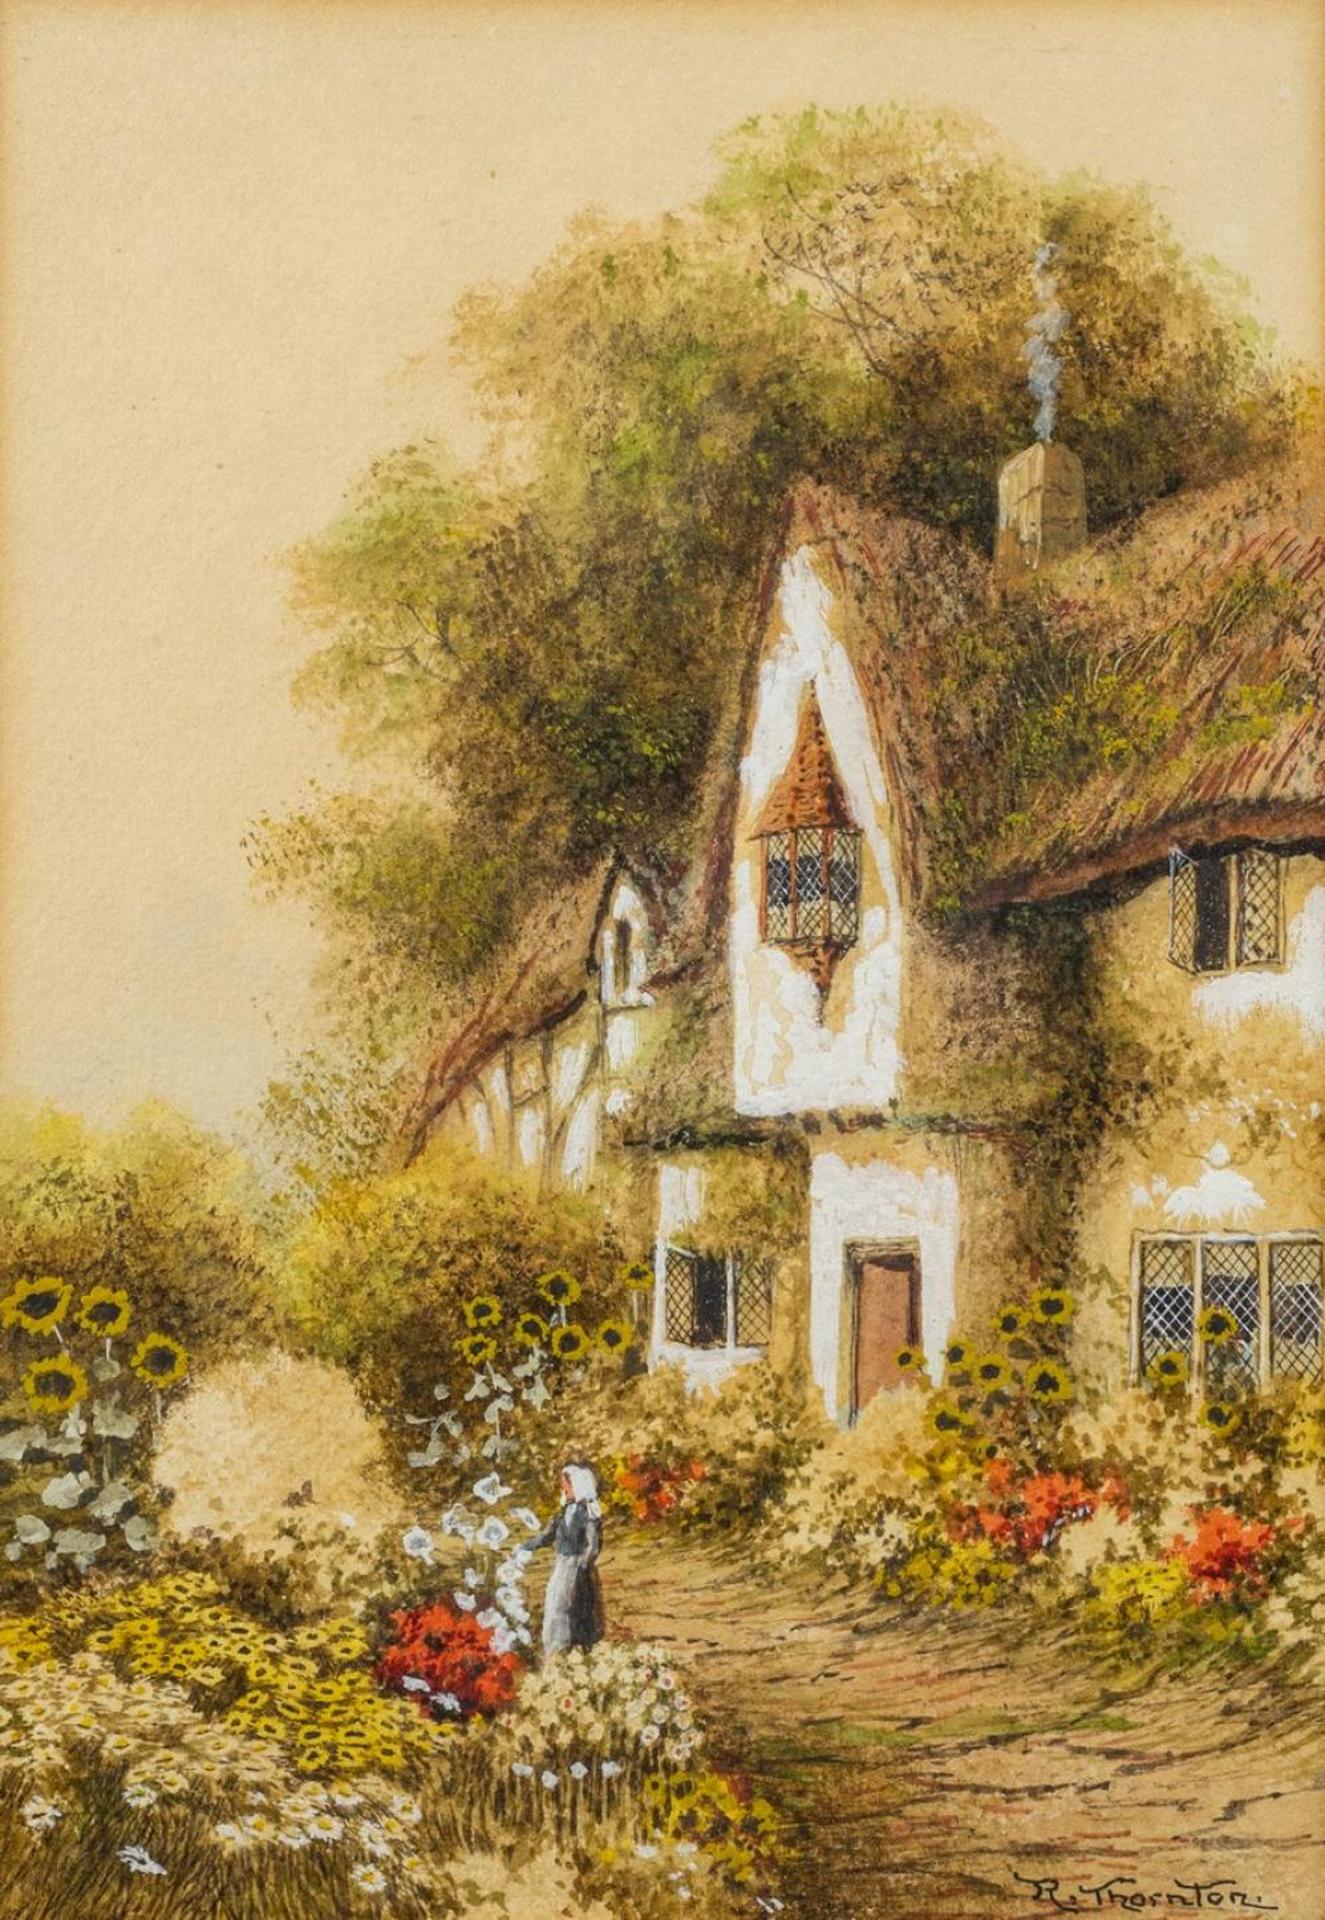 B. Thornton - Figure outside a Thatched Cottage